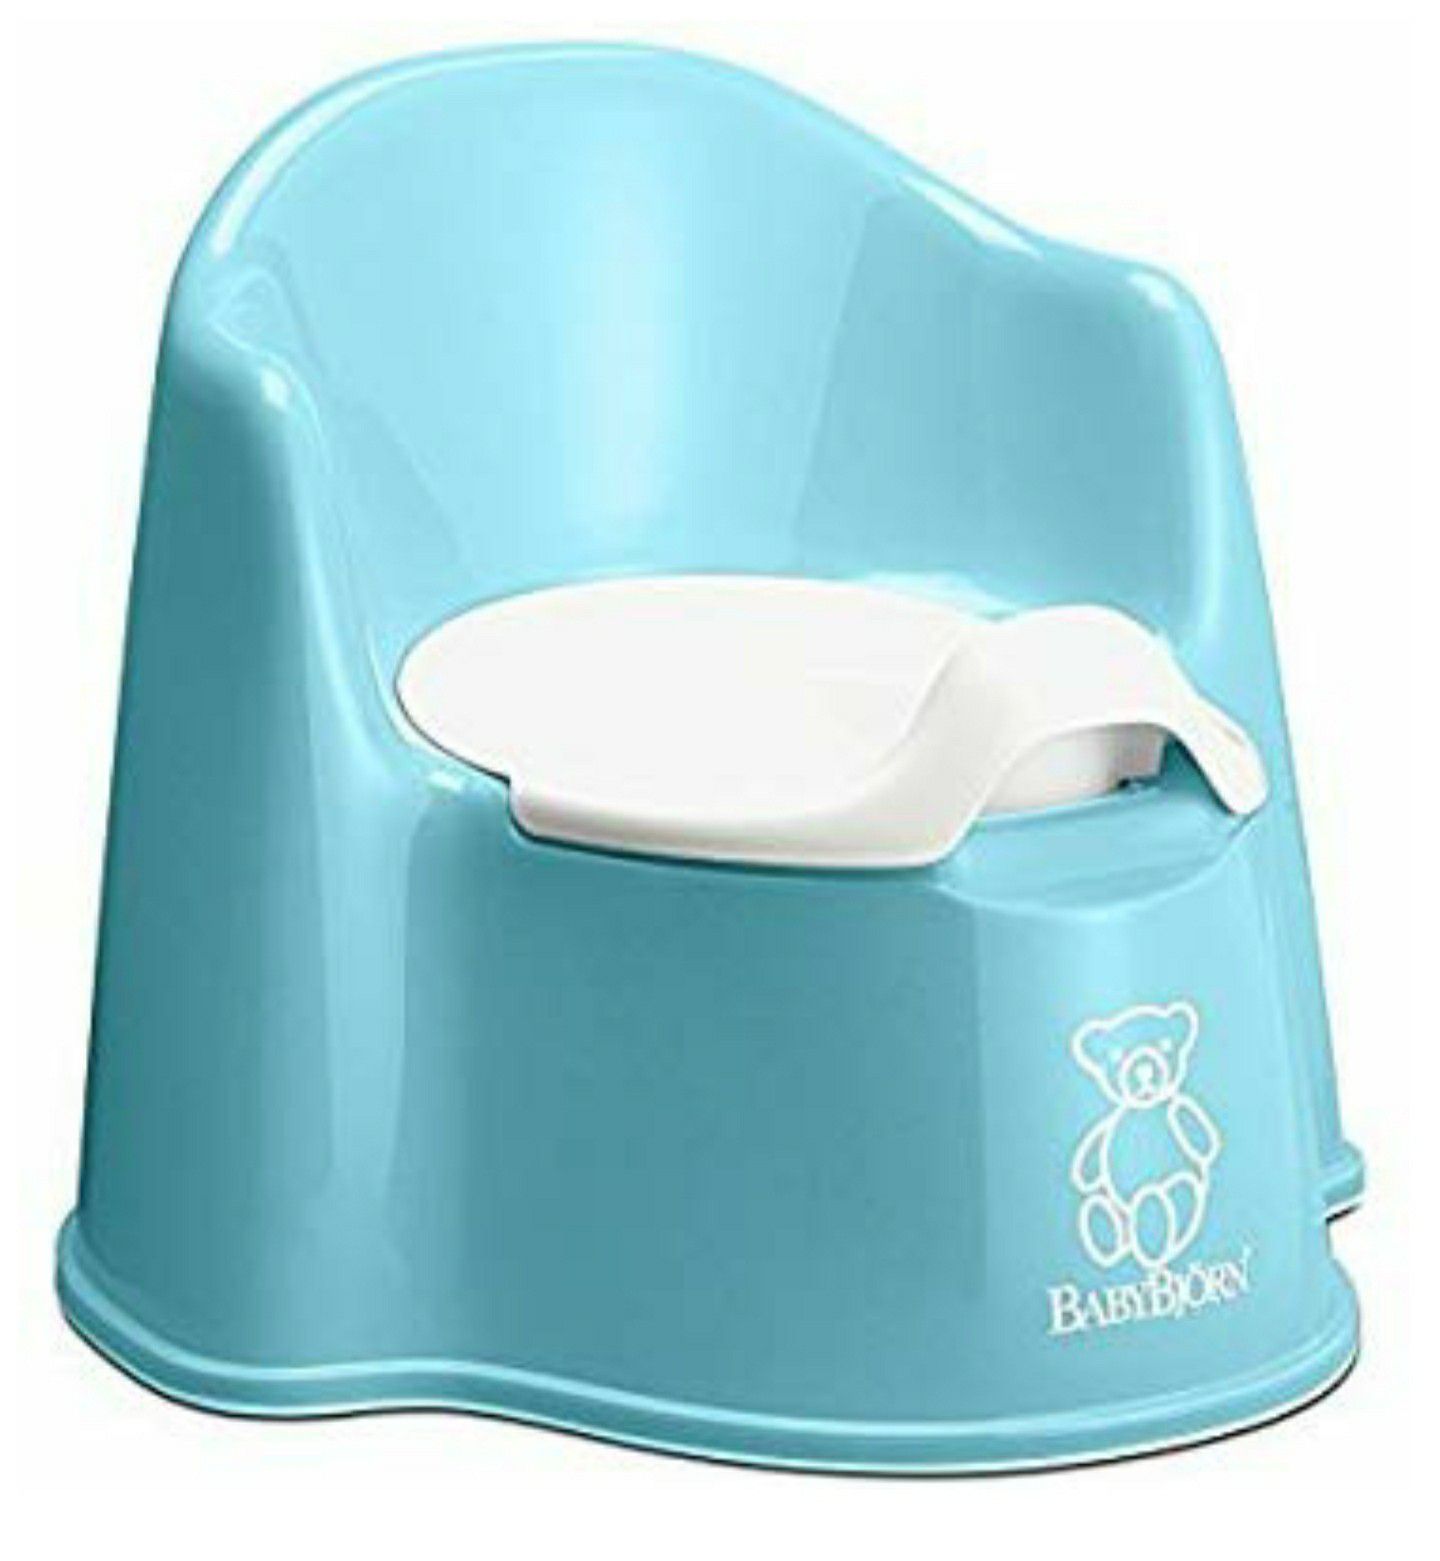 The BABYBJORN Potty Chair.